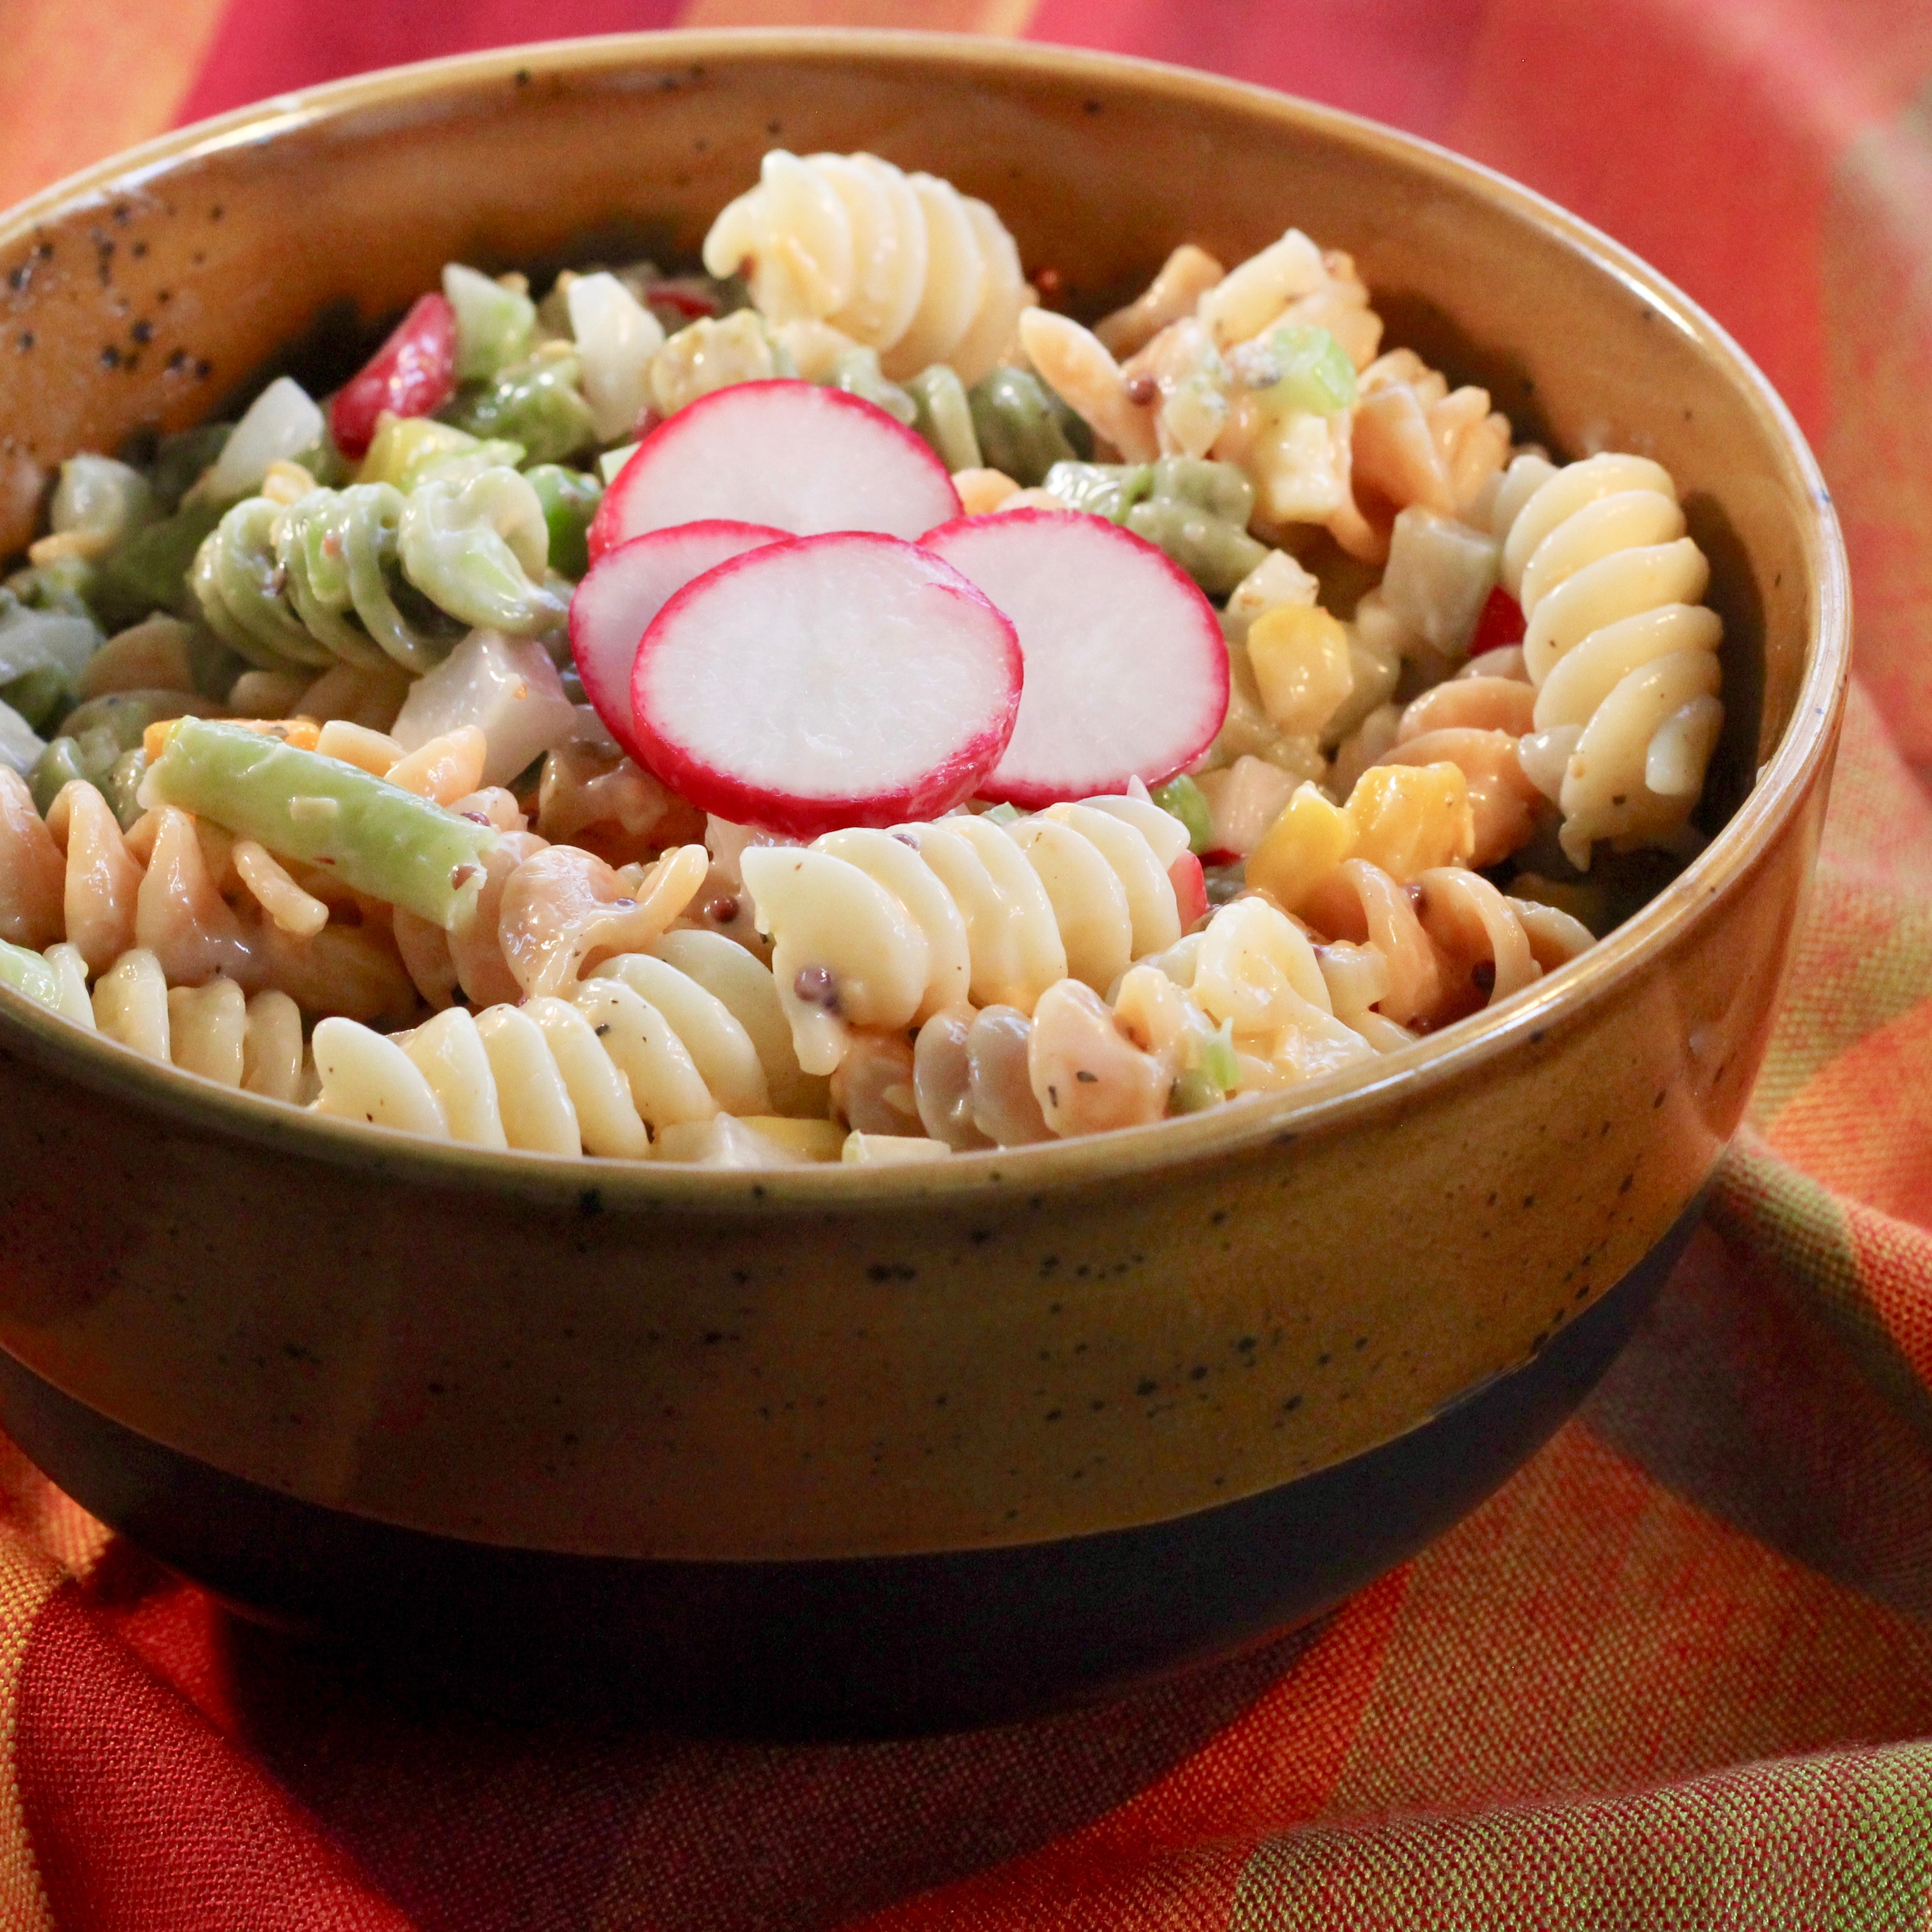 Fiesta Pasta Salad with Dill Pickles